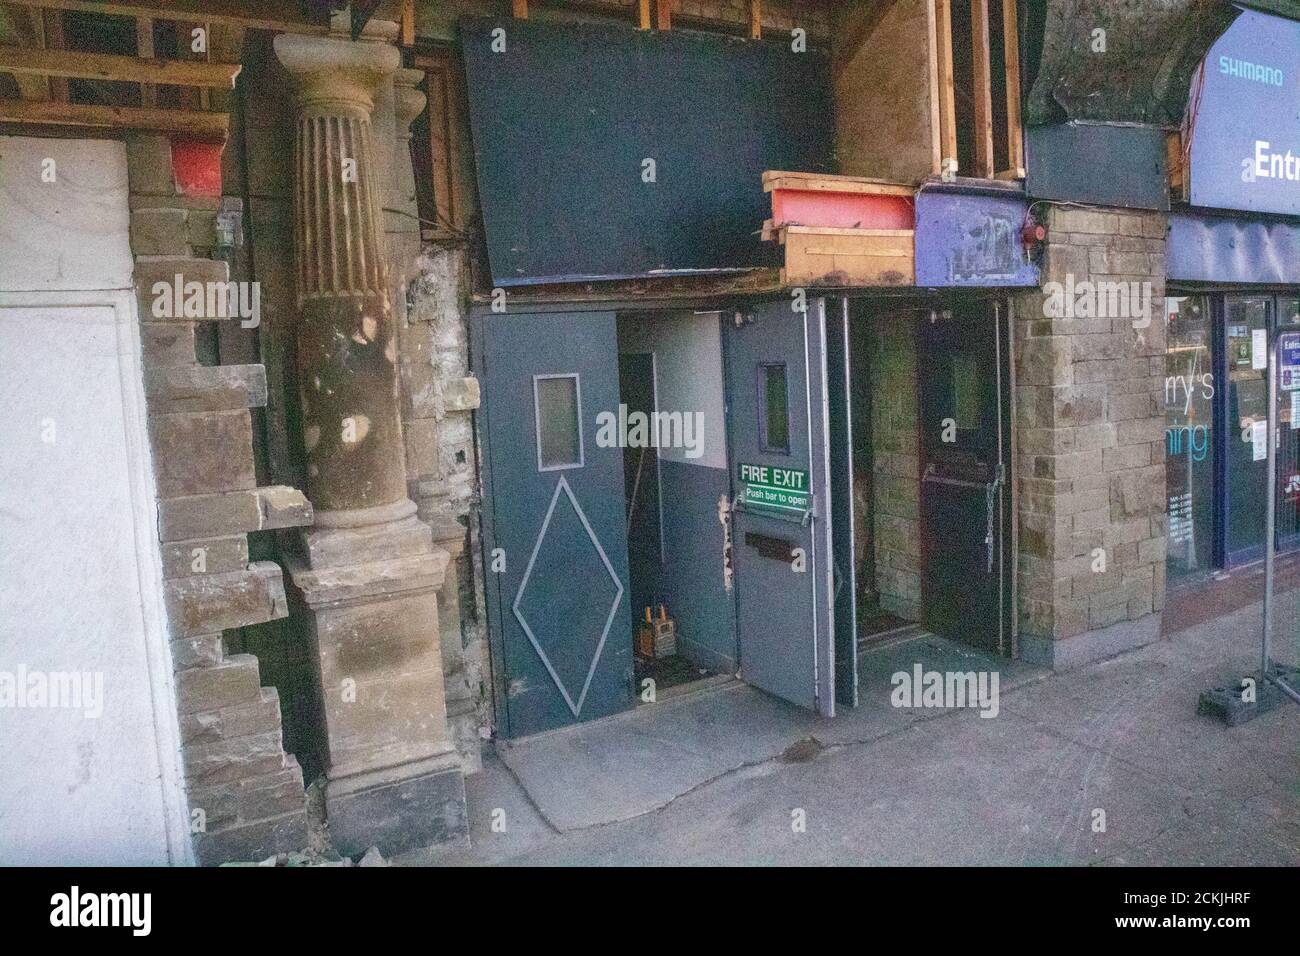 Alhambra Theatre, Morecambe, Lancashire, United Kingdom16th September 2020 Work on the entrance to the Carlton Night Club in Morecambe has revealed stone columns which have been hidden for over fifty years. behind stone block work it is now planned to rebuild the entrance to the Carlton which was origially the Alhambra Music Hall which opened in 1901 and survuved a devestating fire in the 1970s Credit: PN News/Alamy Live News Stock Photo